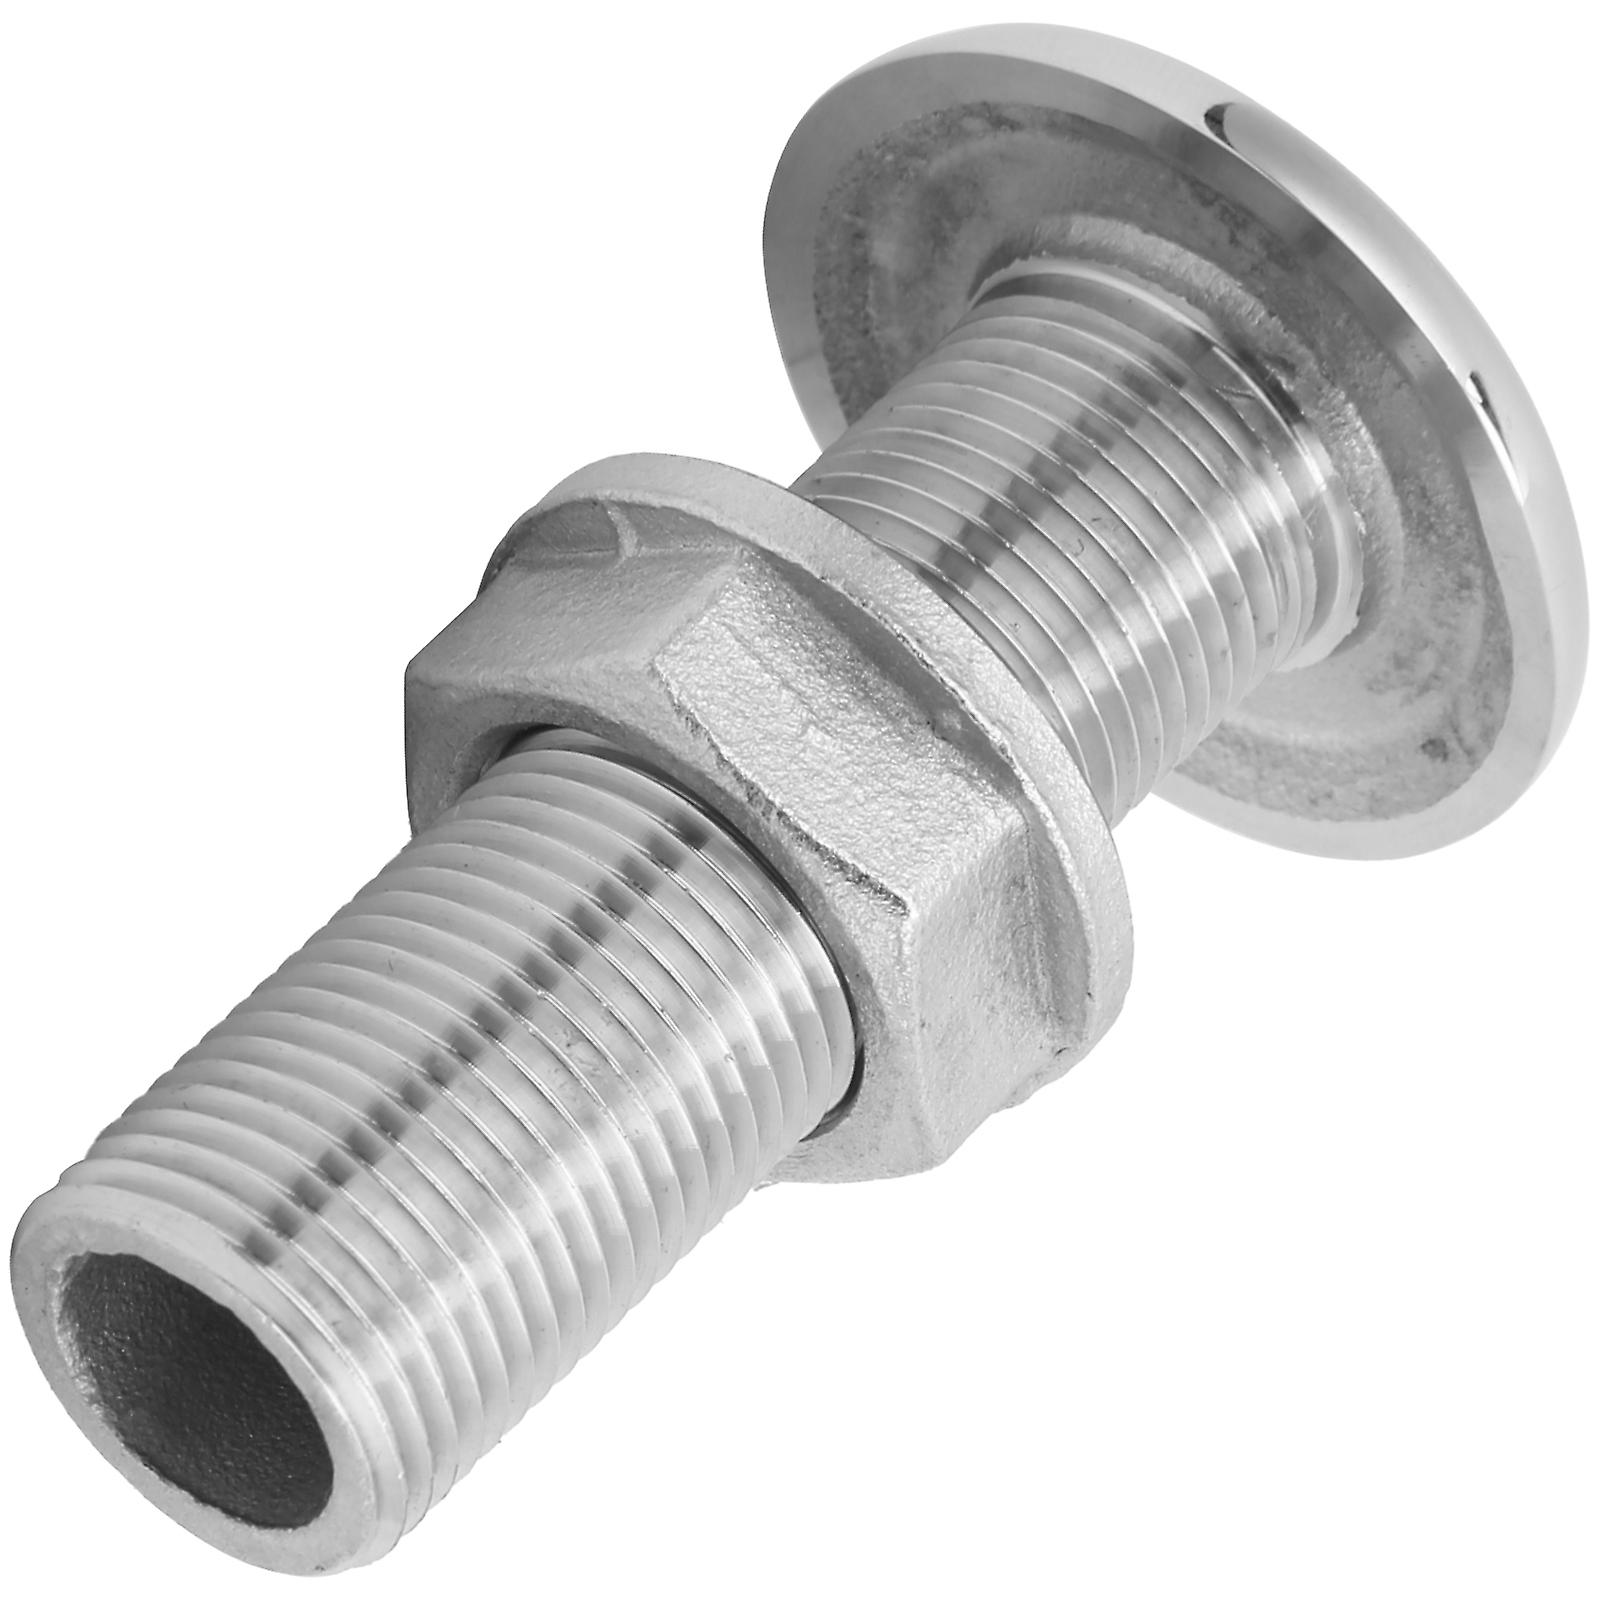 Thru Hull Fitting Connector Stainless Steel Mjs022 Outlet Joint For Boats Yacht Hose3/8in